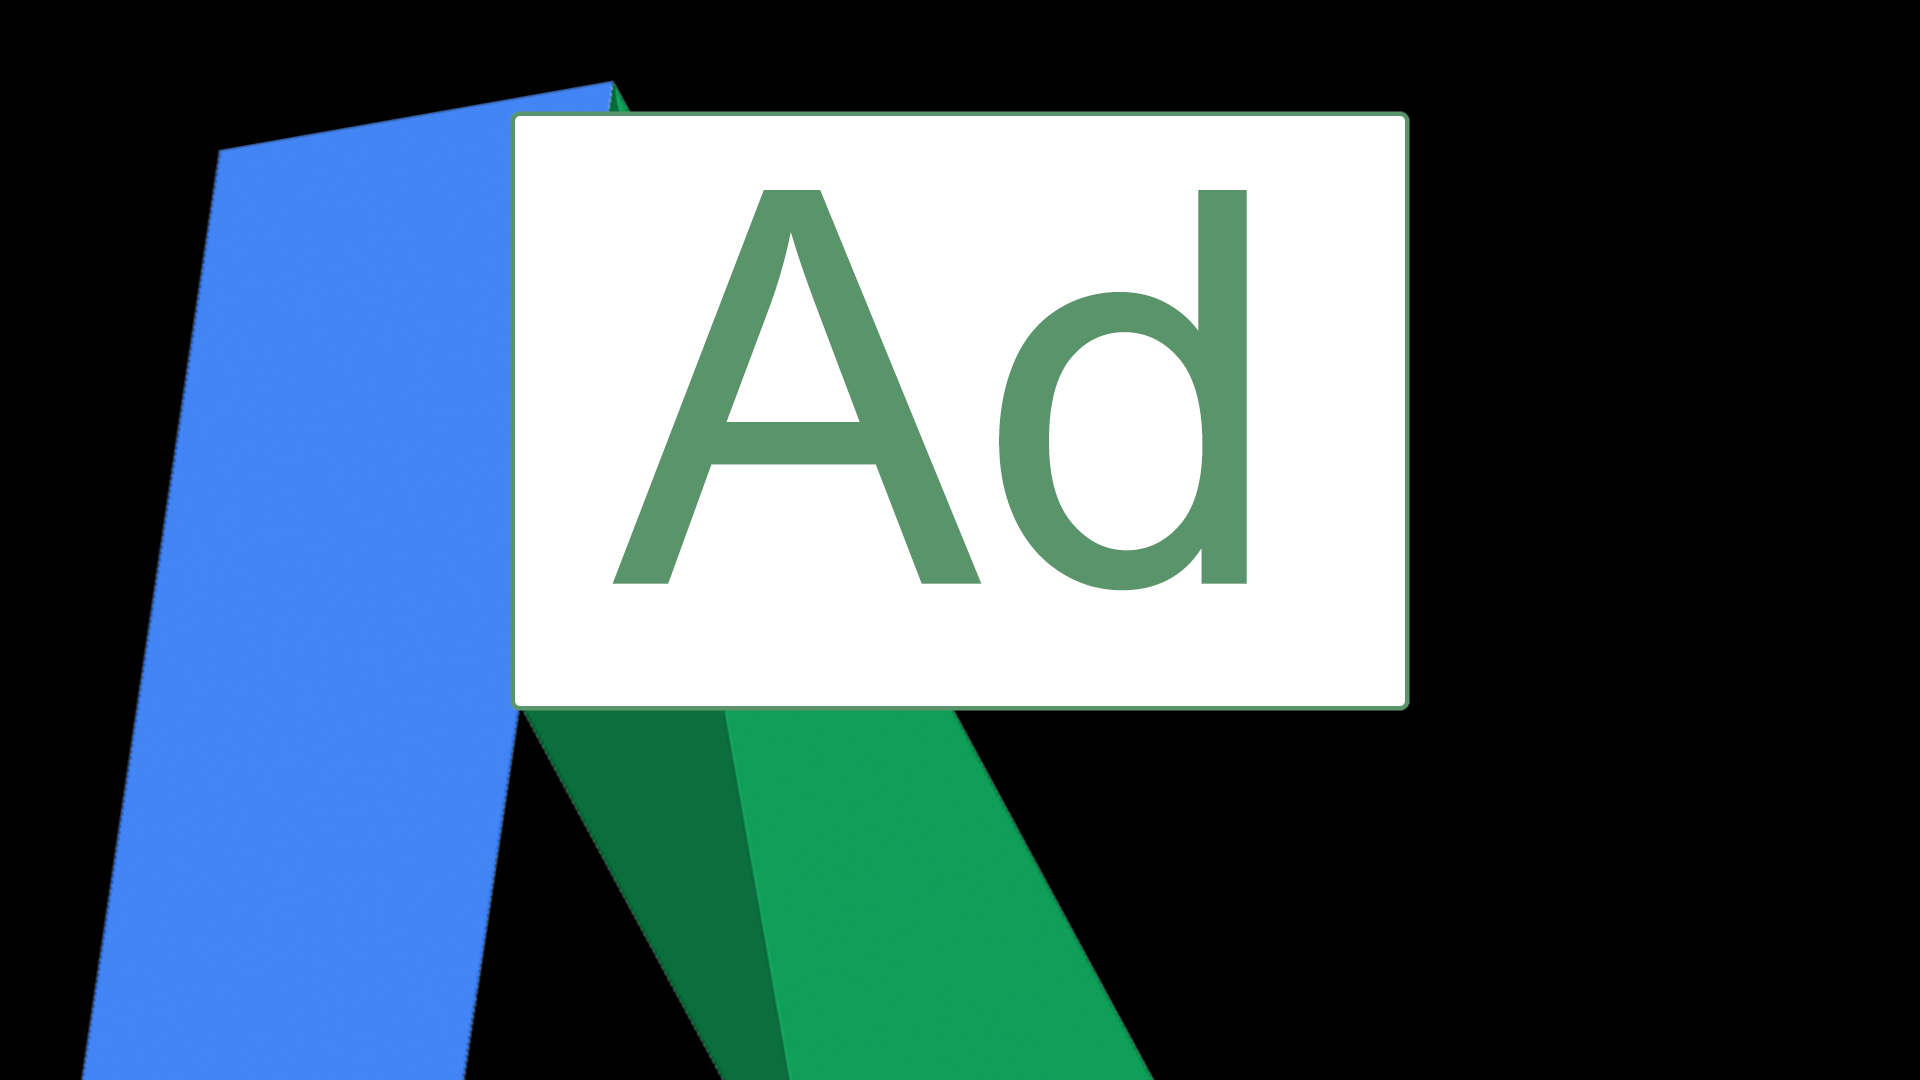 Green with White Outline Logo - Official: Google's green outlined 'Ad' label replacing solid green